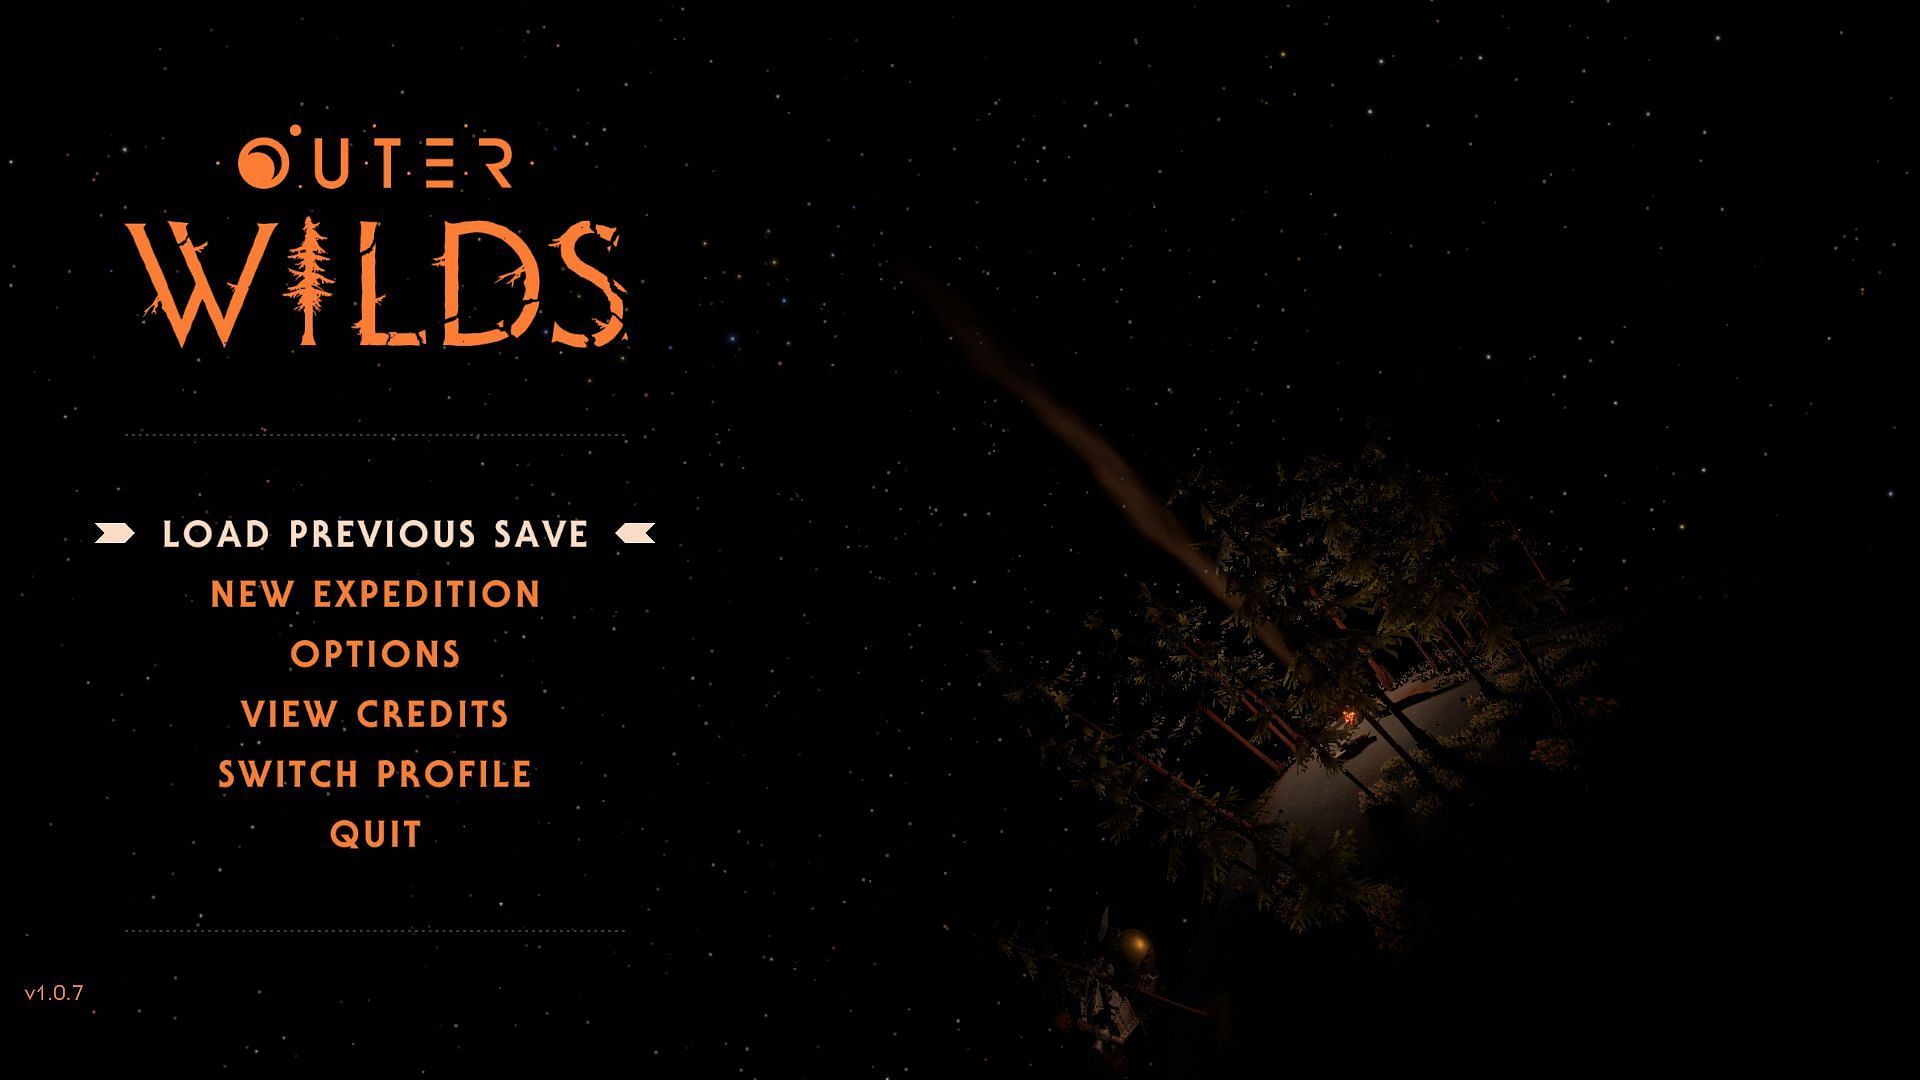 Outer Wilds Hands On: Groundhog Day in space, with a tantalizing